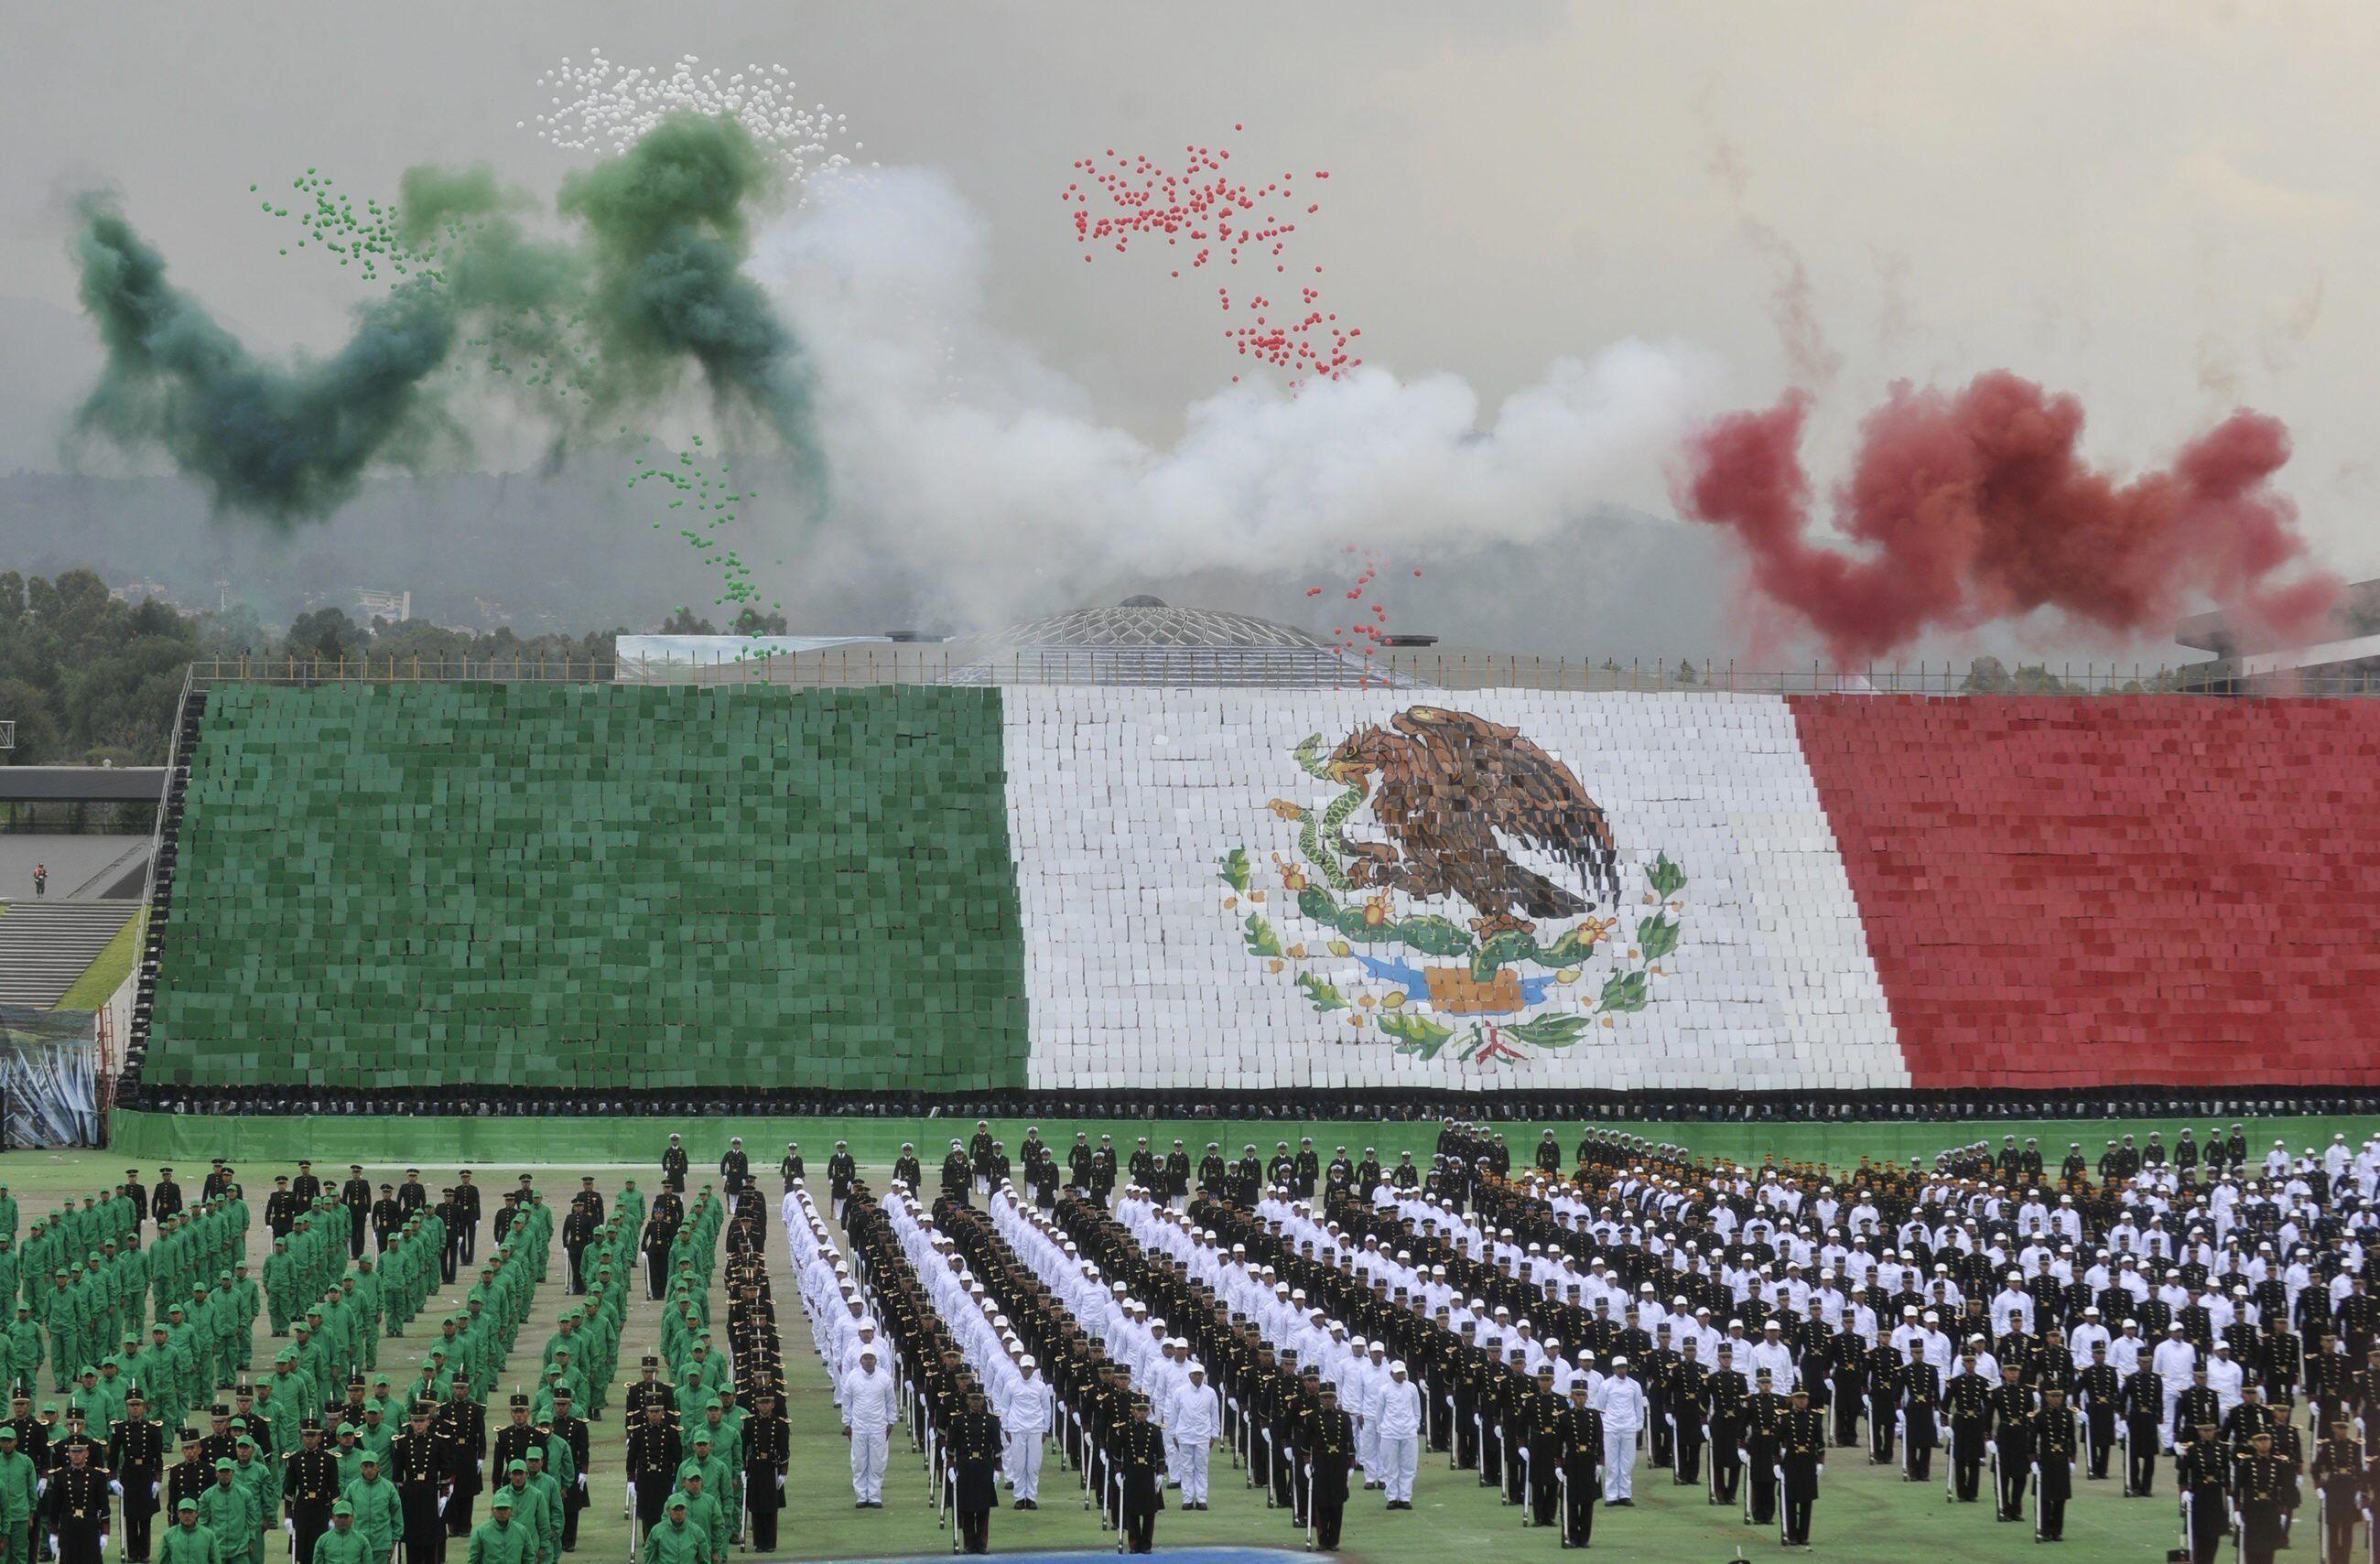 mexican independence day essay